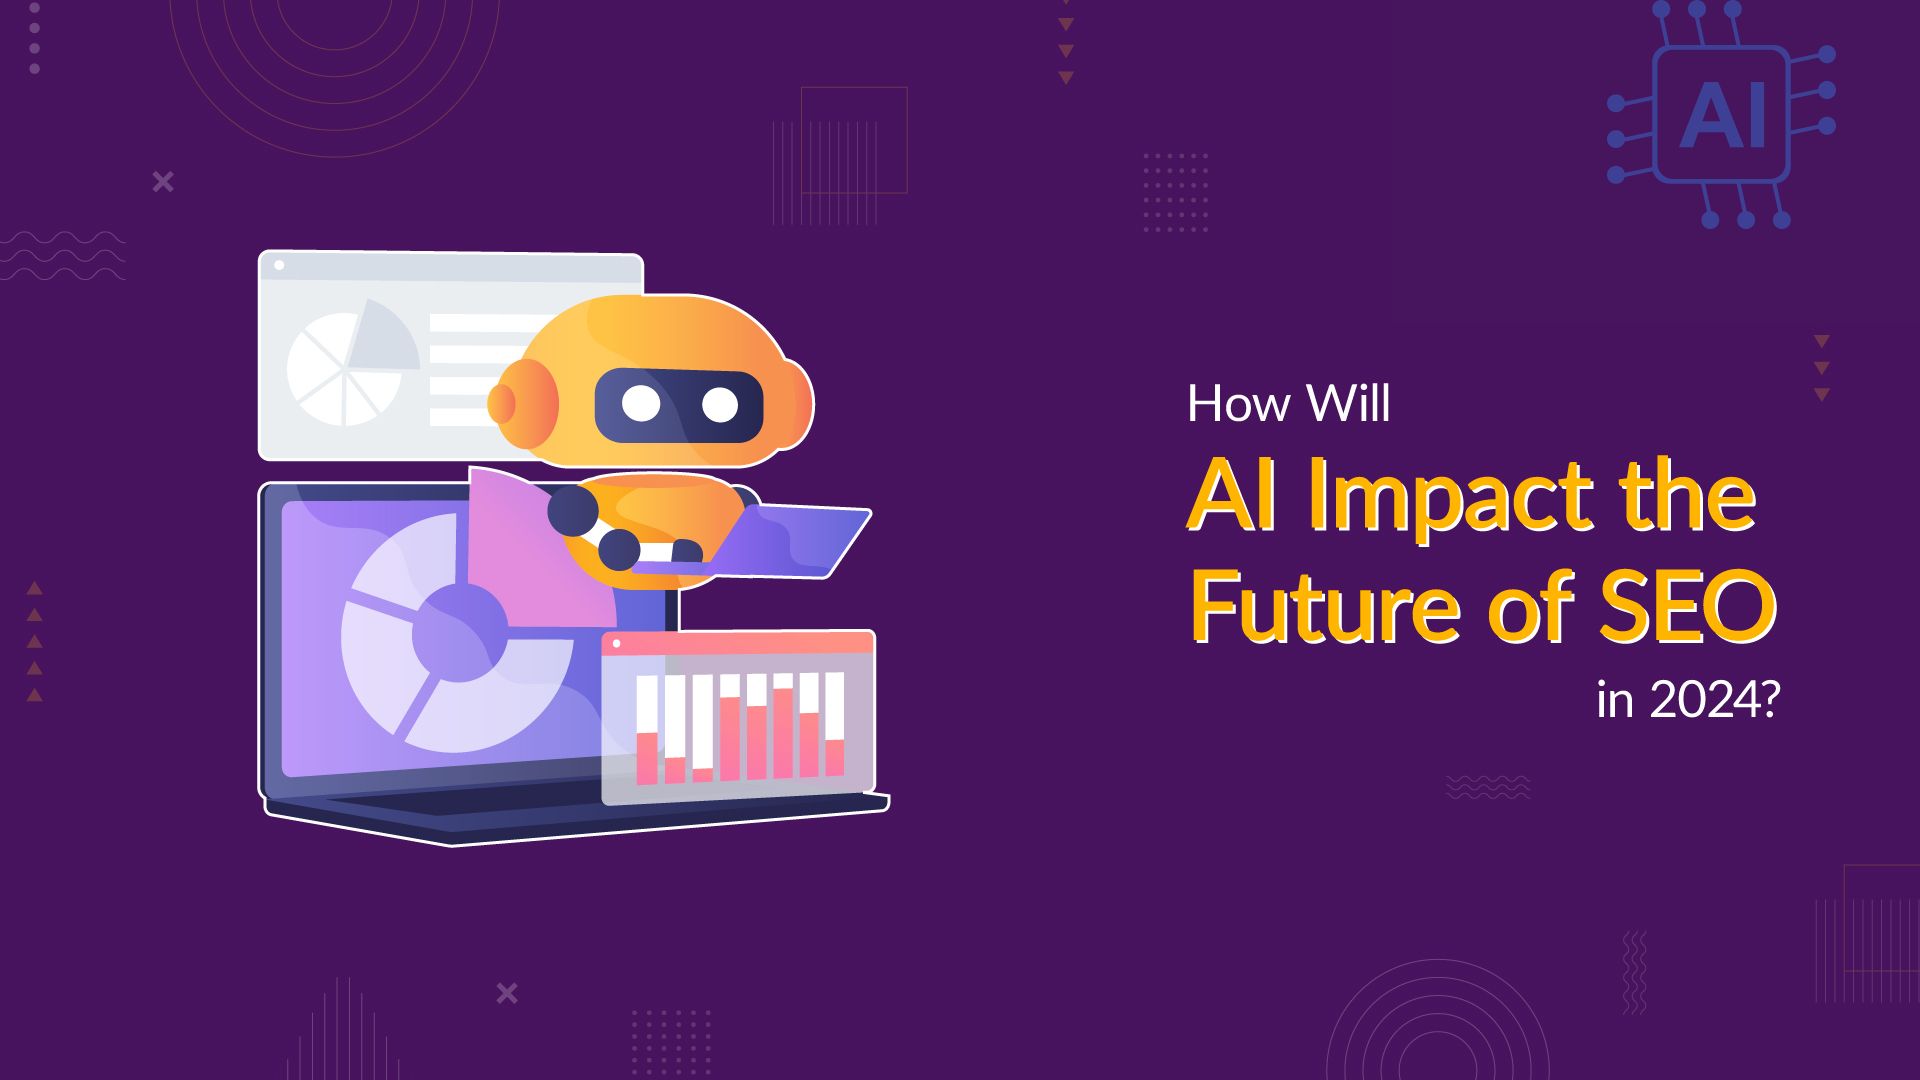 How will AI impact the future of SEO in 2024?